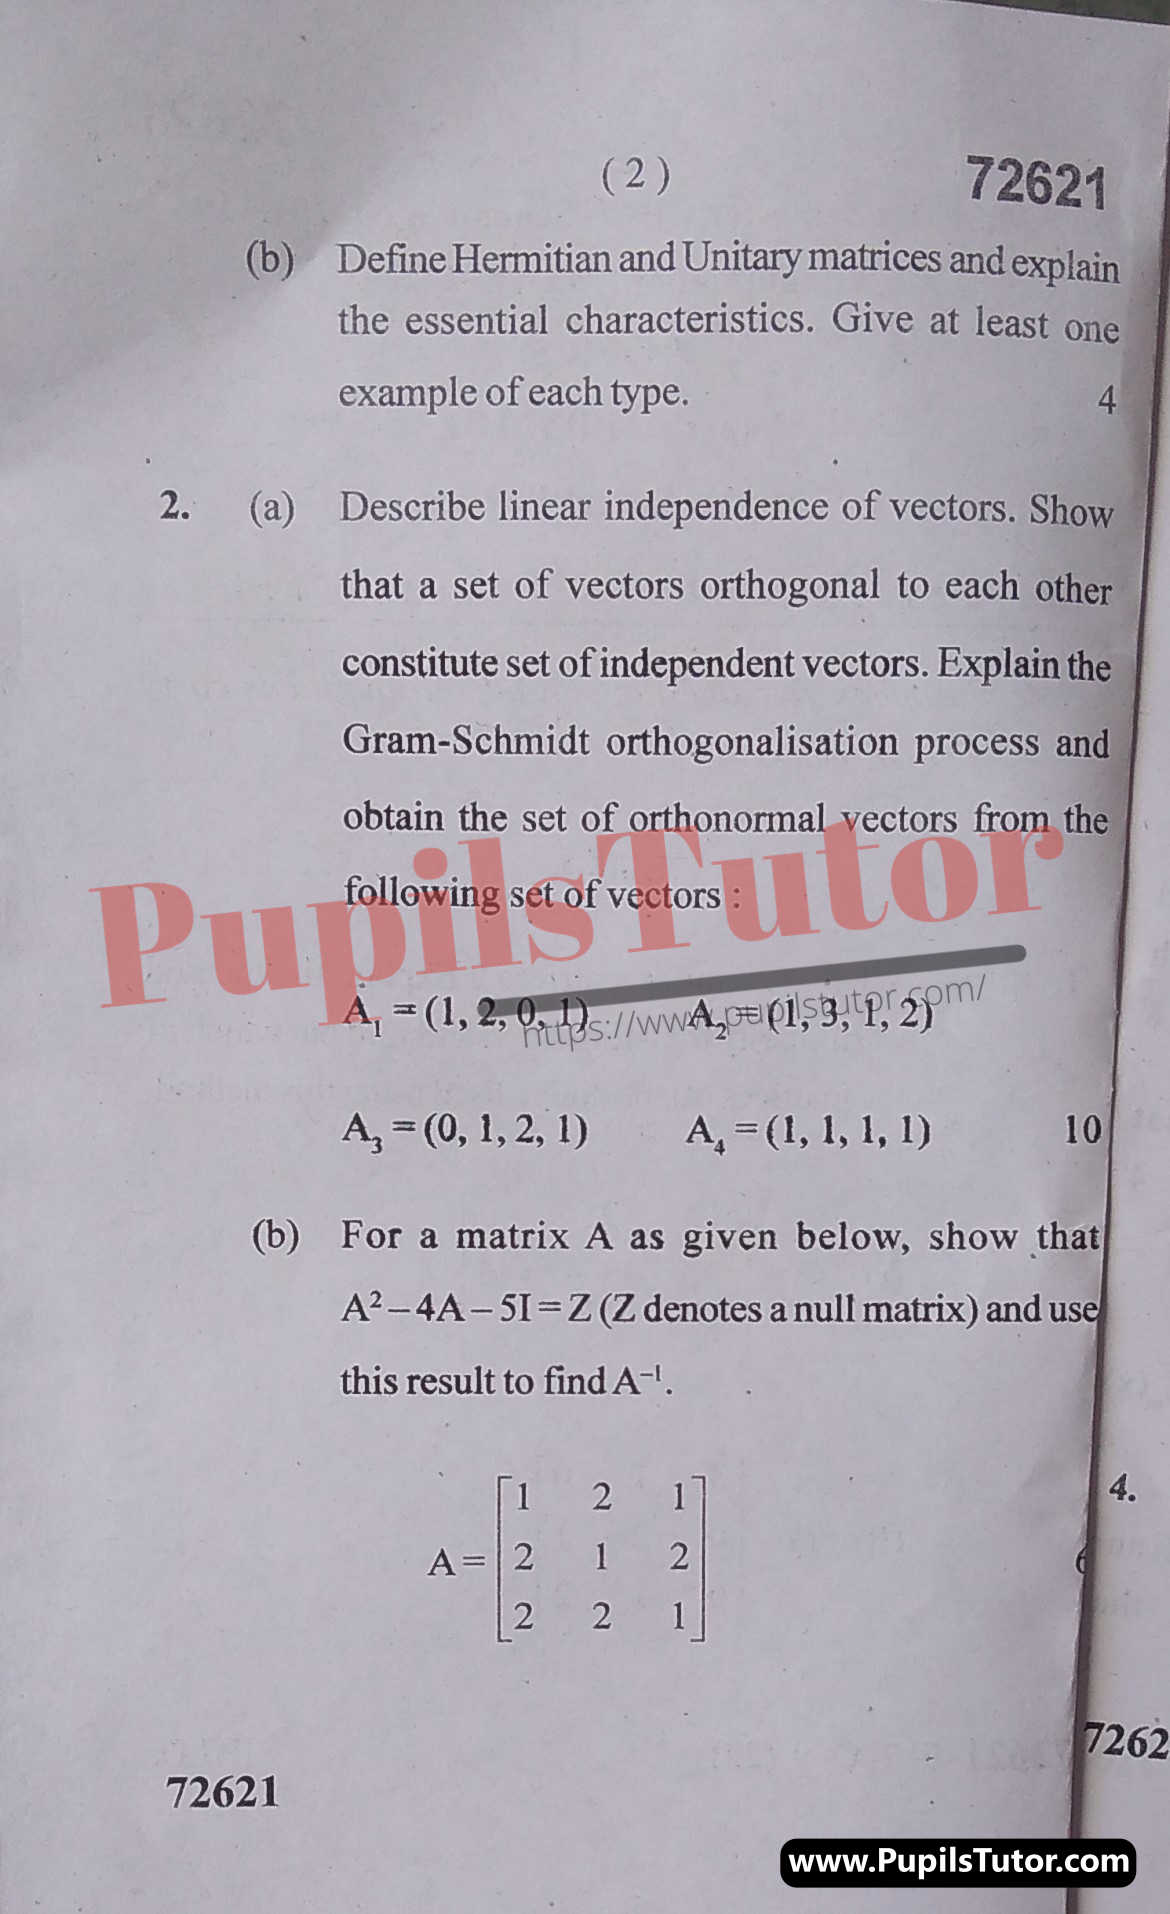 M.D. University M.Sc. [Physics] Mathematical Physics First Semester Important Question Answer And Solution - www.pupilstutor.com (Paper Page Number 2)